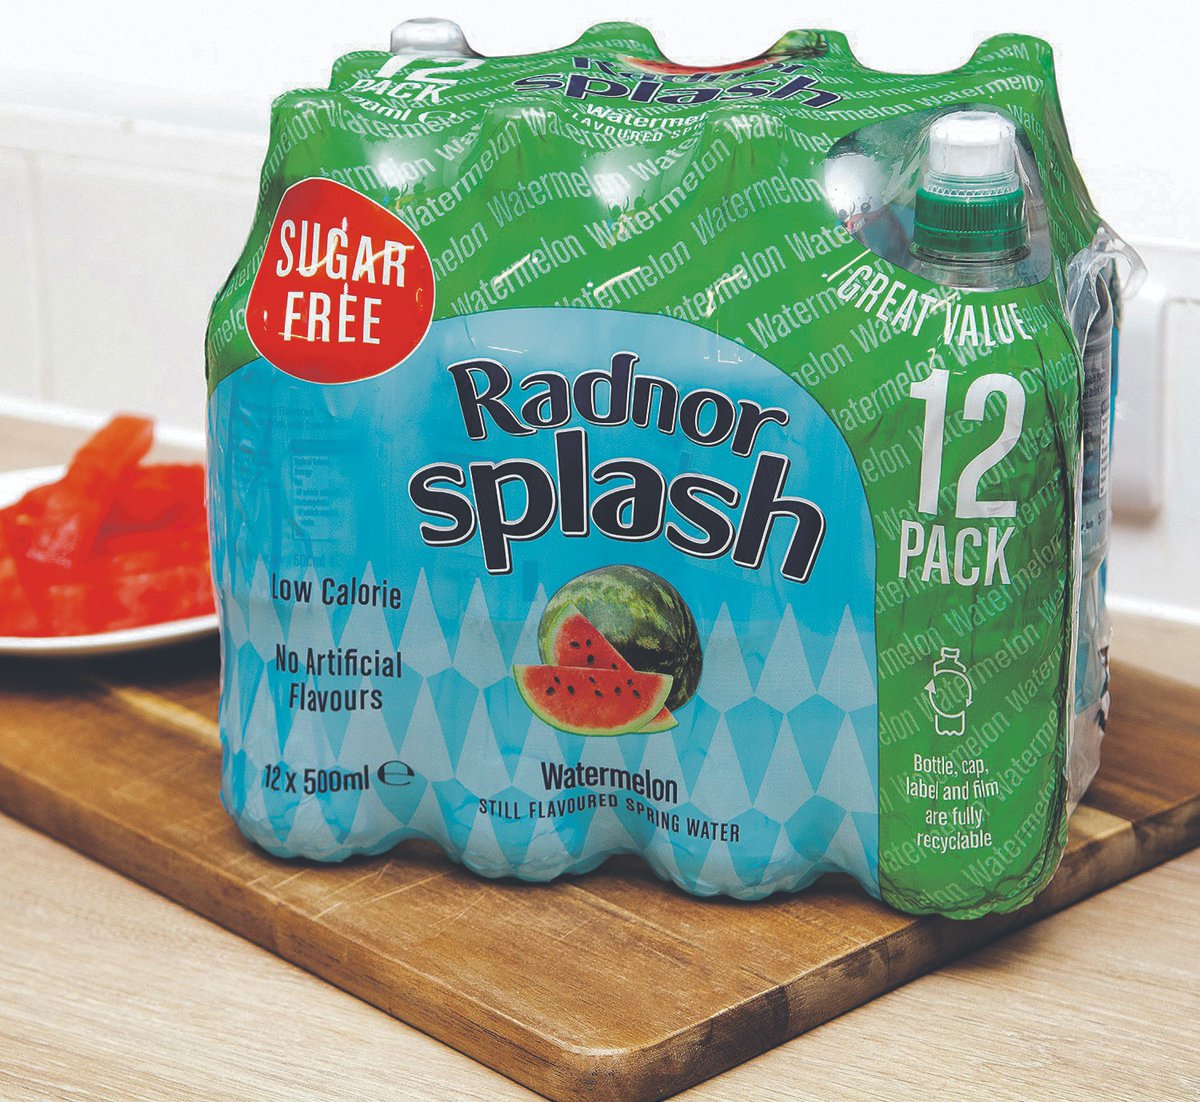 Full-filling our obligation to bring you, your latest mouthful of industry news from the Food and Drink sectors. 😋 @Radnorhills - 'Radnor Splash has unveiled a set of new flavours and environmentally friendly retail ready pack size.' Read on page 16: ow.ly/bq9350FnvtW